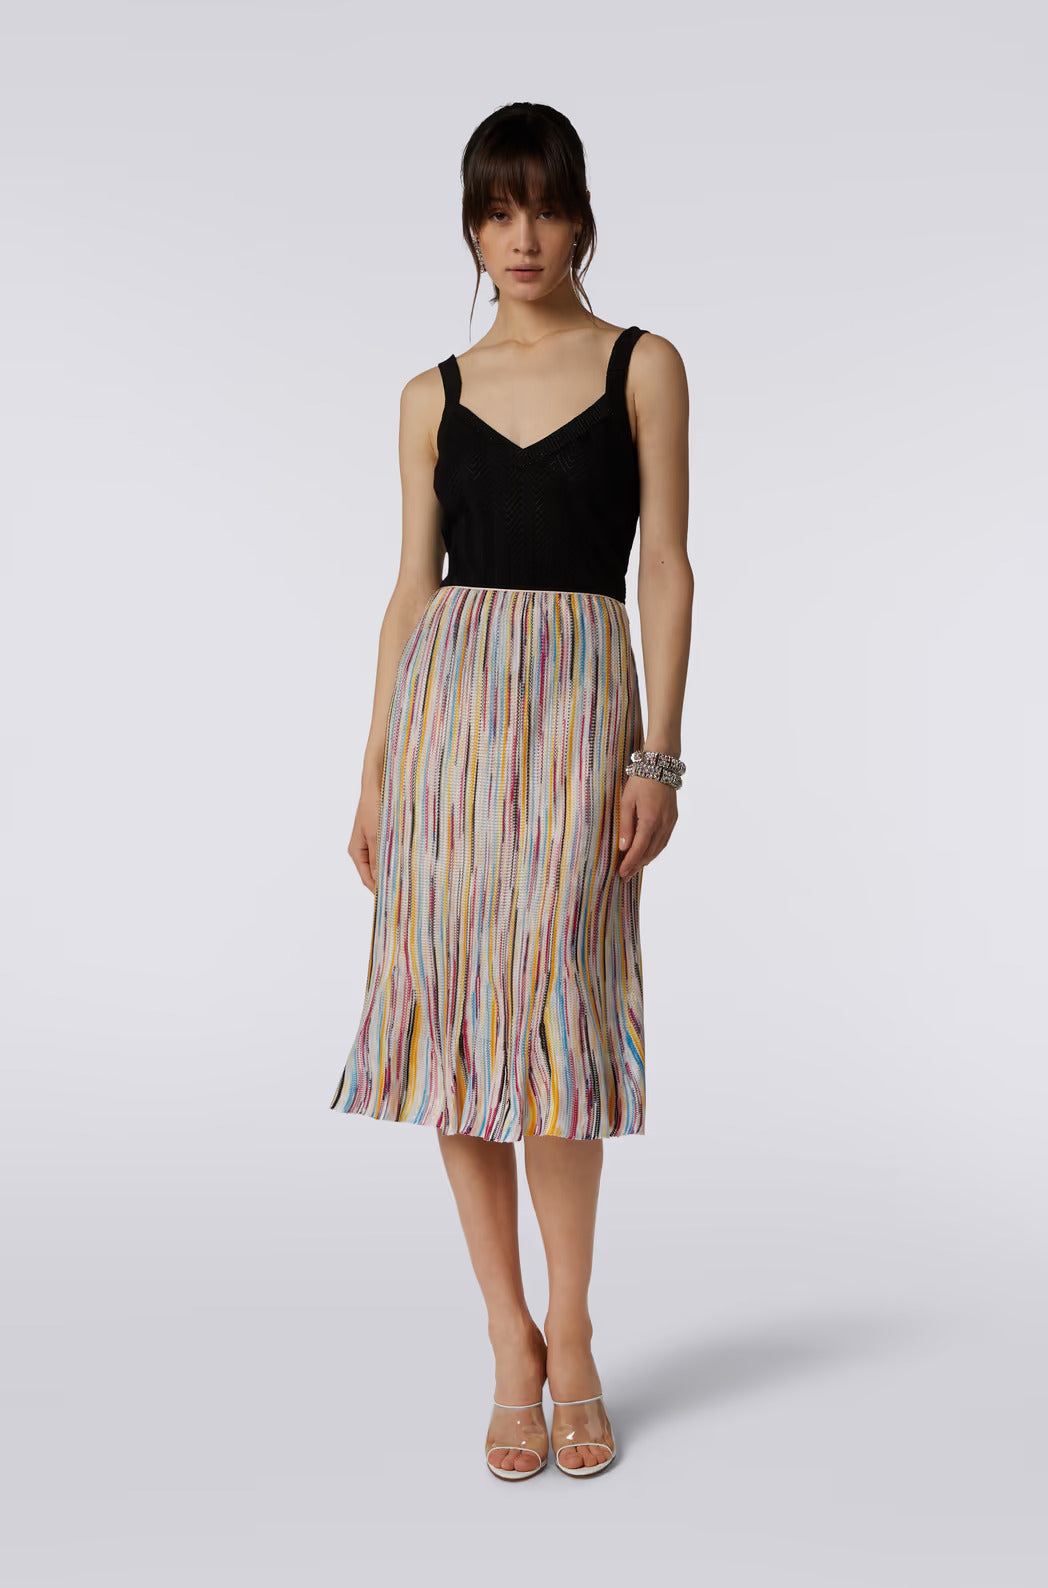 Knitted Fully lined structured Skirt-Skirt-Missoni-Debs Boutique